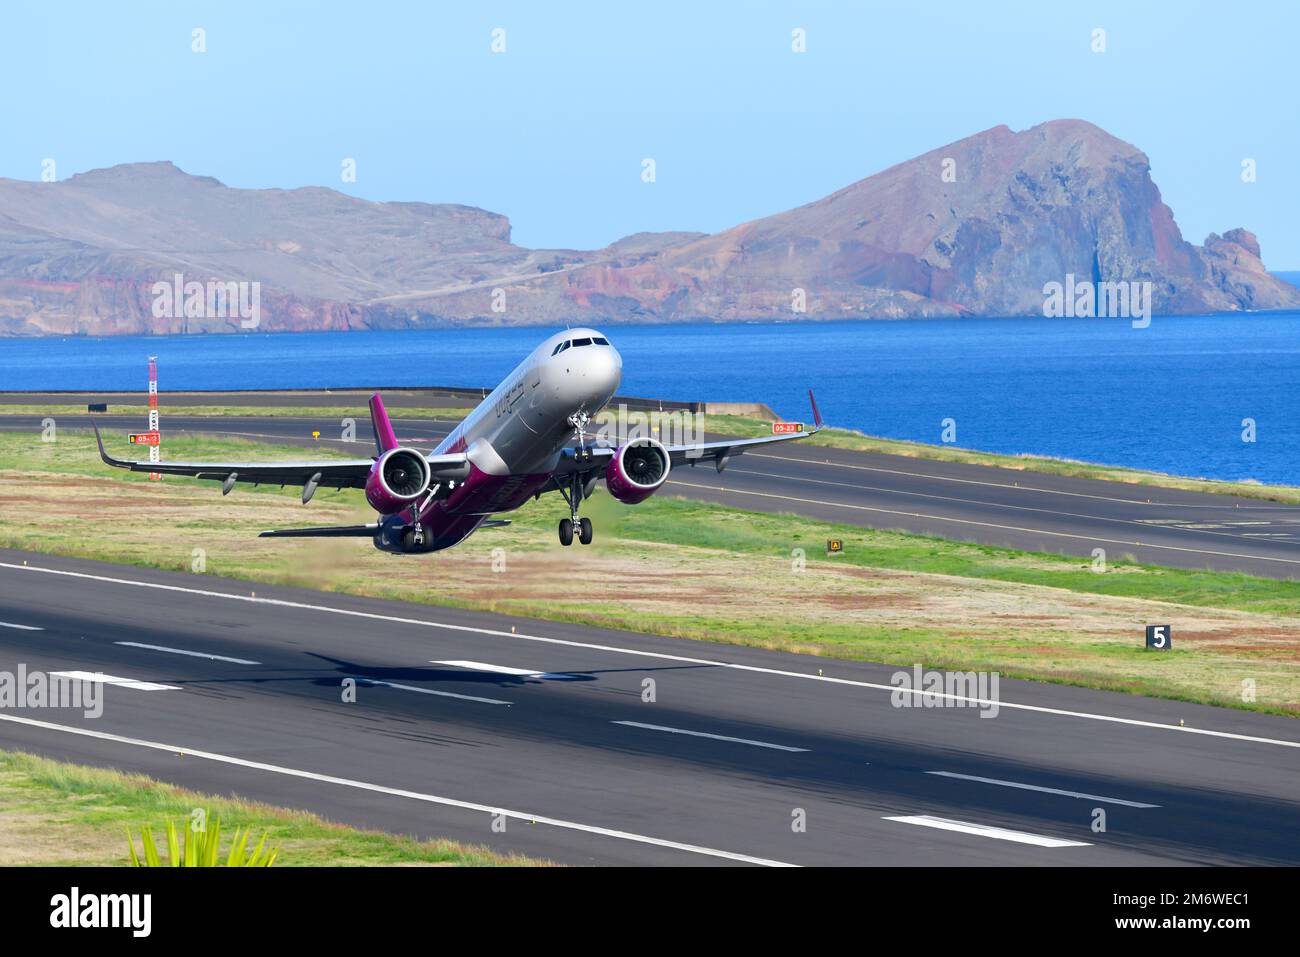 Wizz Air Airbus A321 aircraft taking off. WizzAir aircraft A321 during take off from Madeira Airport (Funchal Airport) with landscape behind. Stock Photo